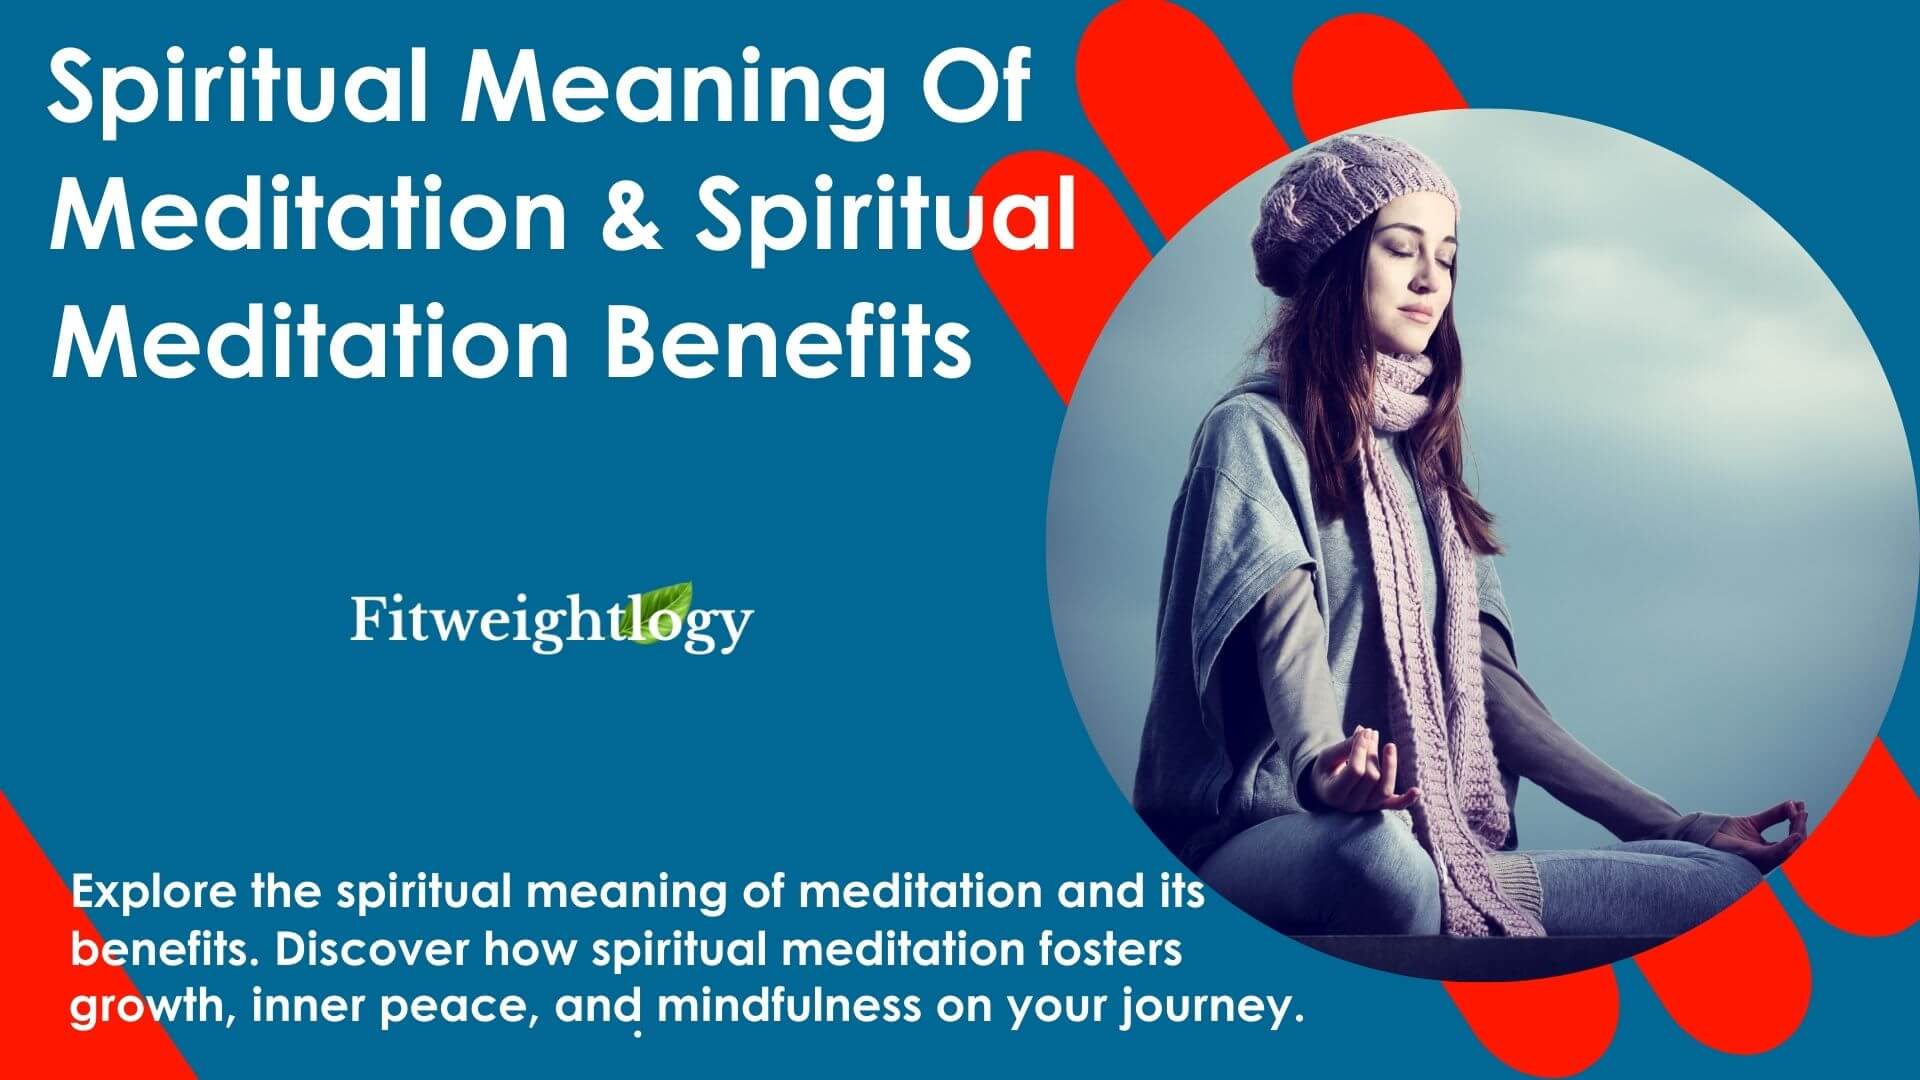 Fitweightlogy - Spiritual Meaning Of Meditation: Spiritual Meditation Benefits